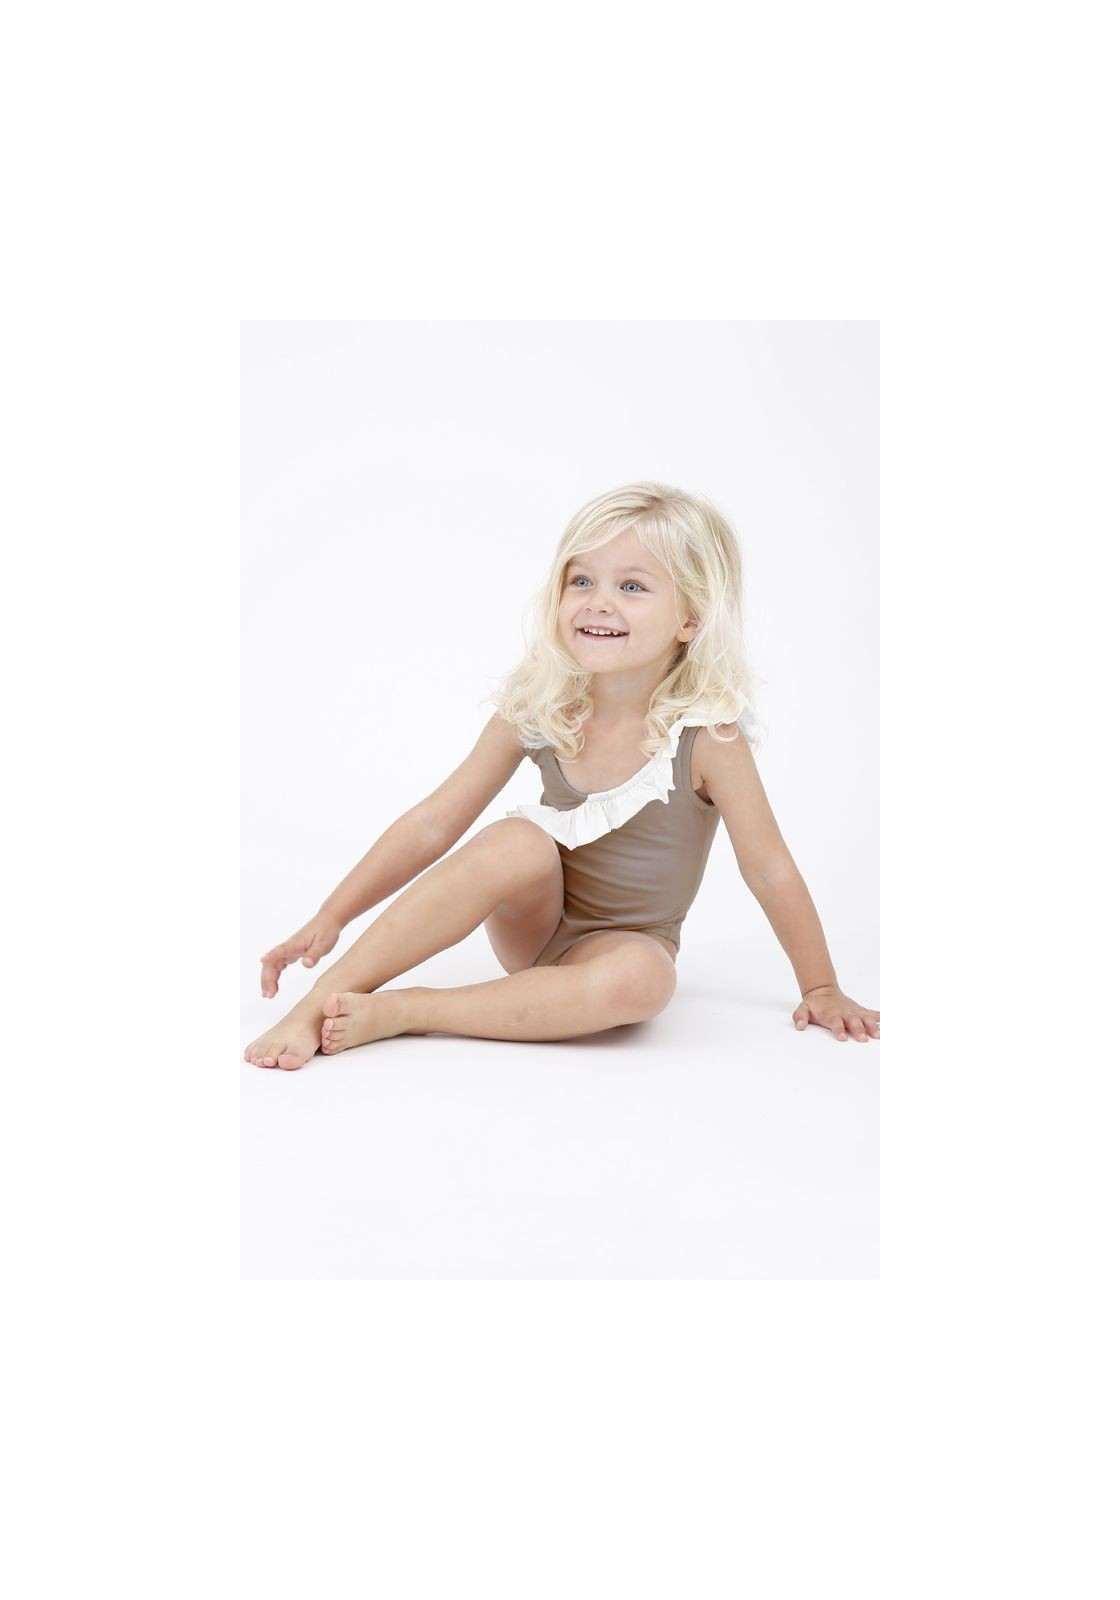 JULIA BABY One piece swimsuit for girls in chanterelle and white. -  Maillot de bain enfant